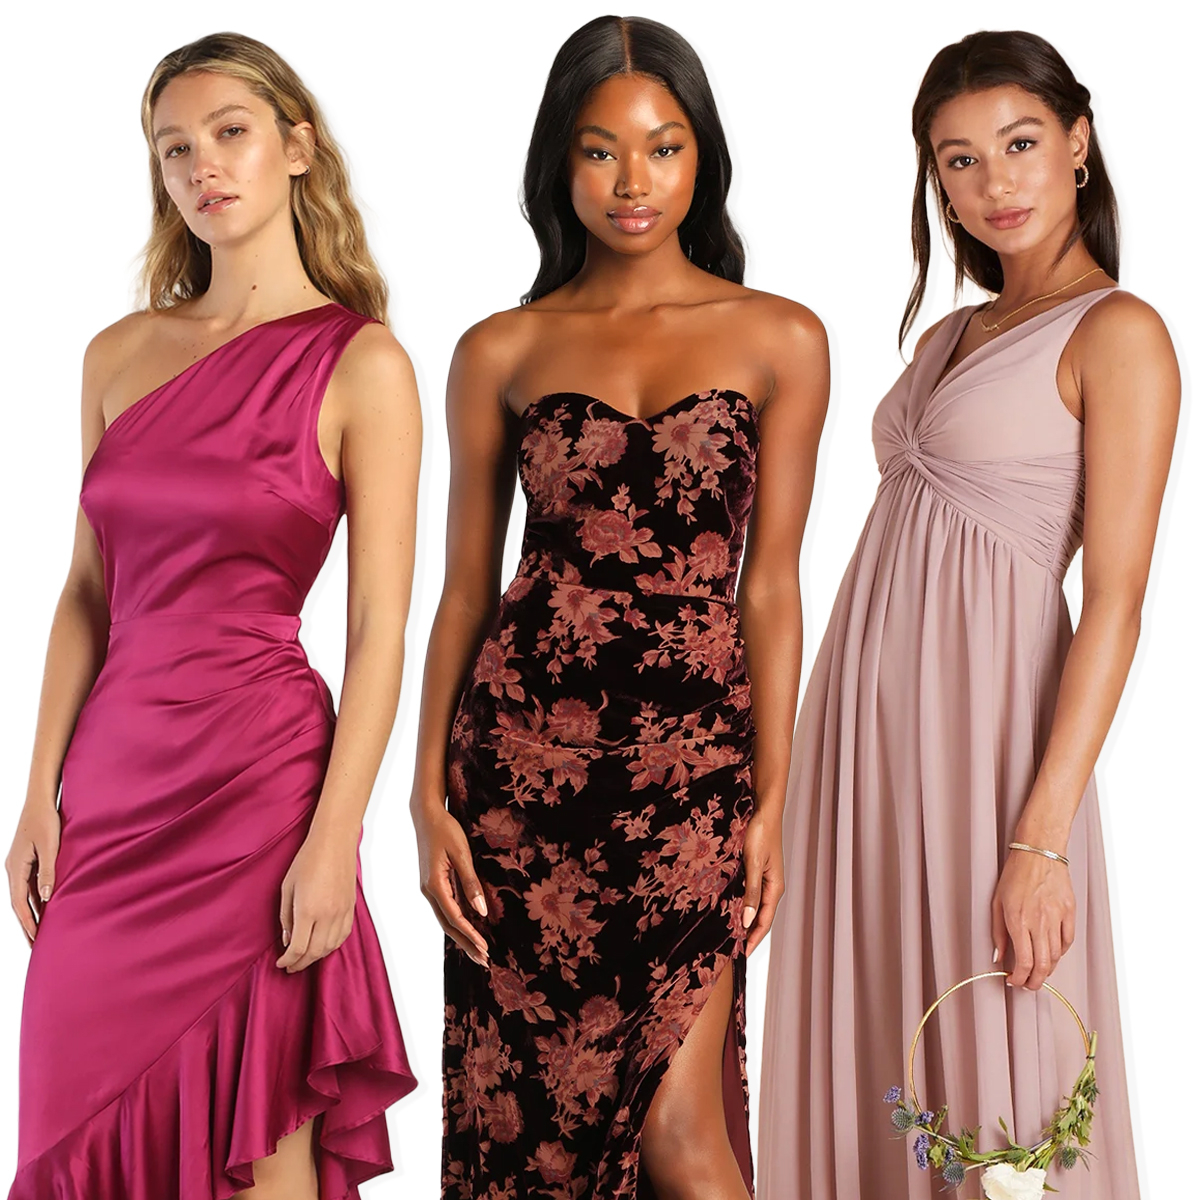 Where to Buy Wedding Guest Dresses